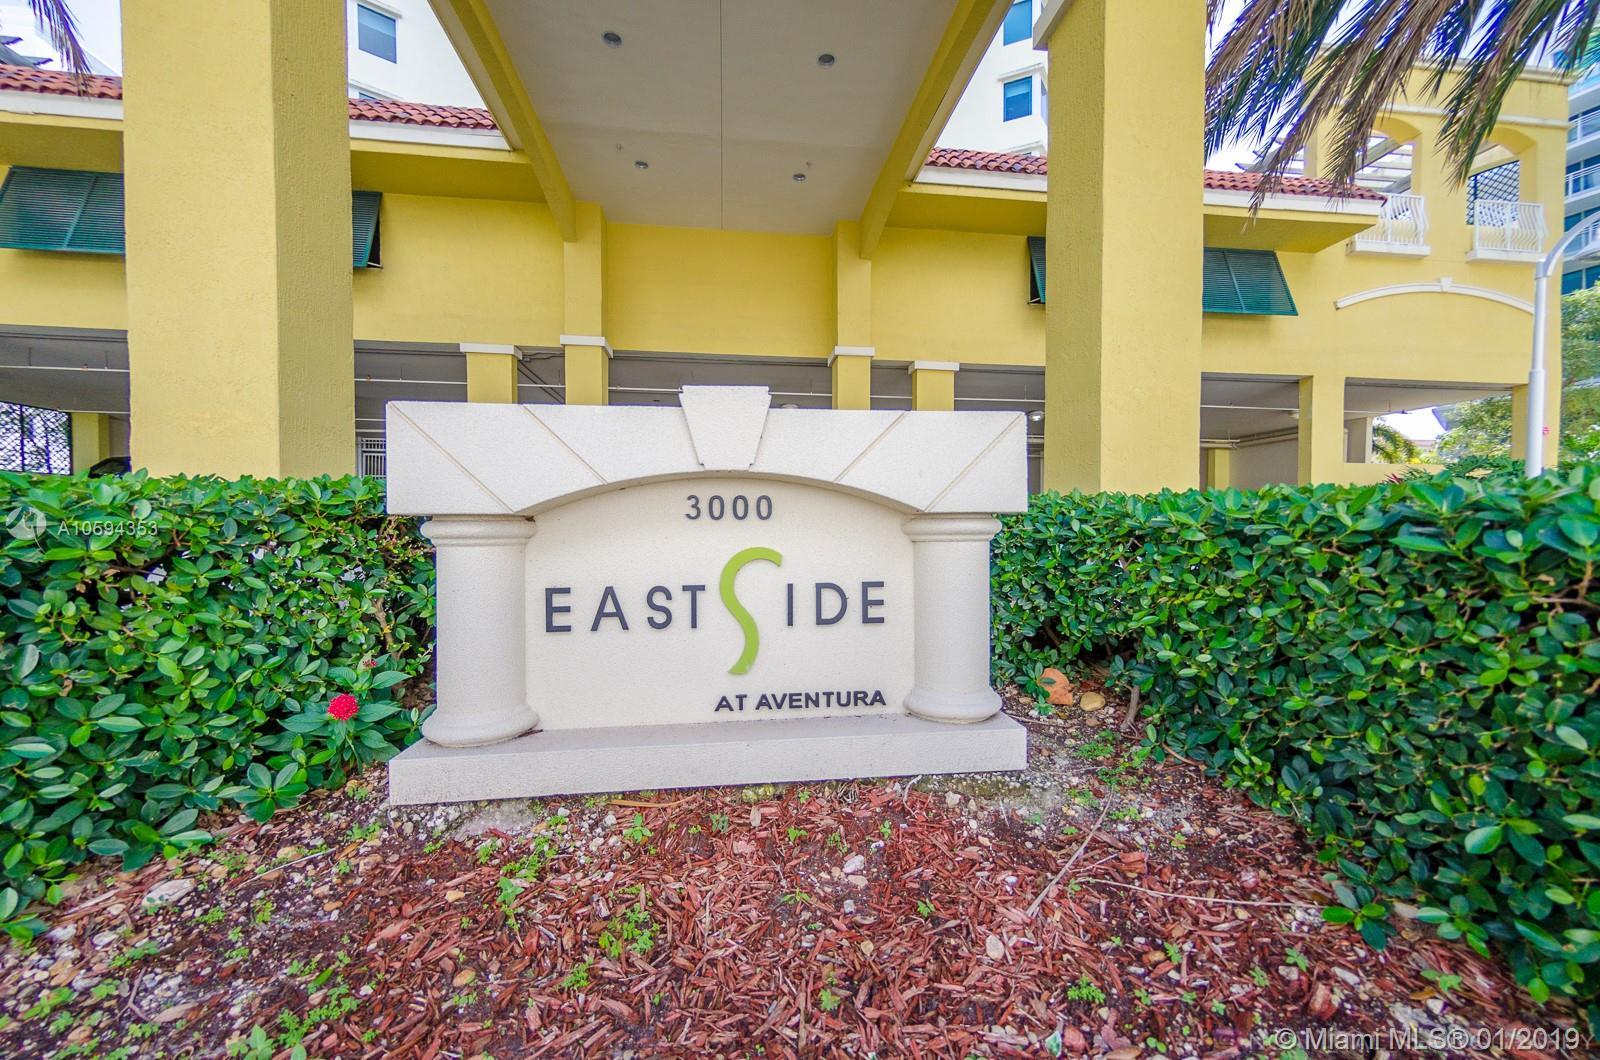 Eastside at Aventura Condos for sale